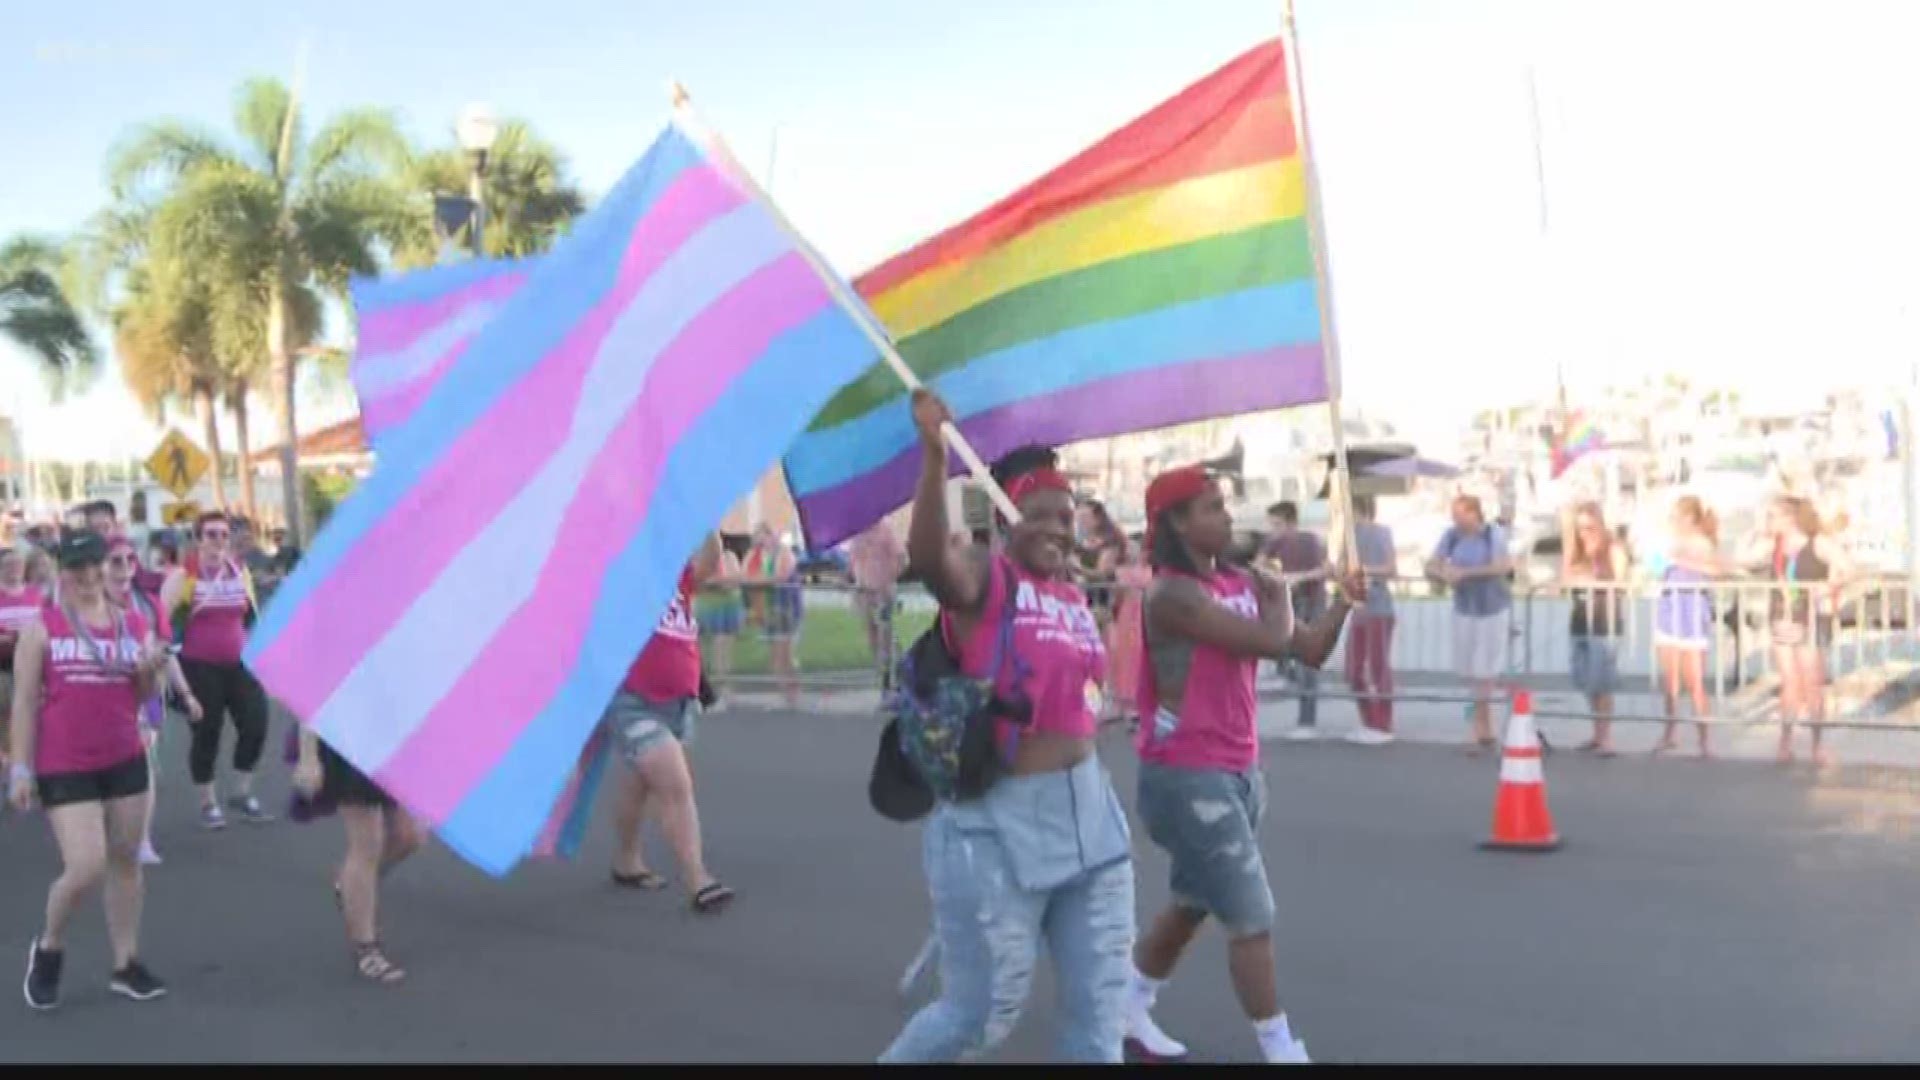 St. Pete Pride 2019 Where to see the parade, festival, TransPride